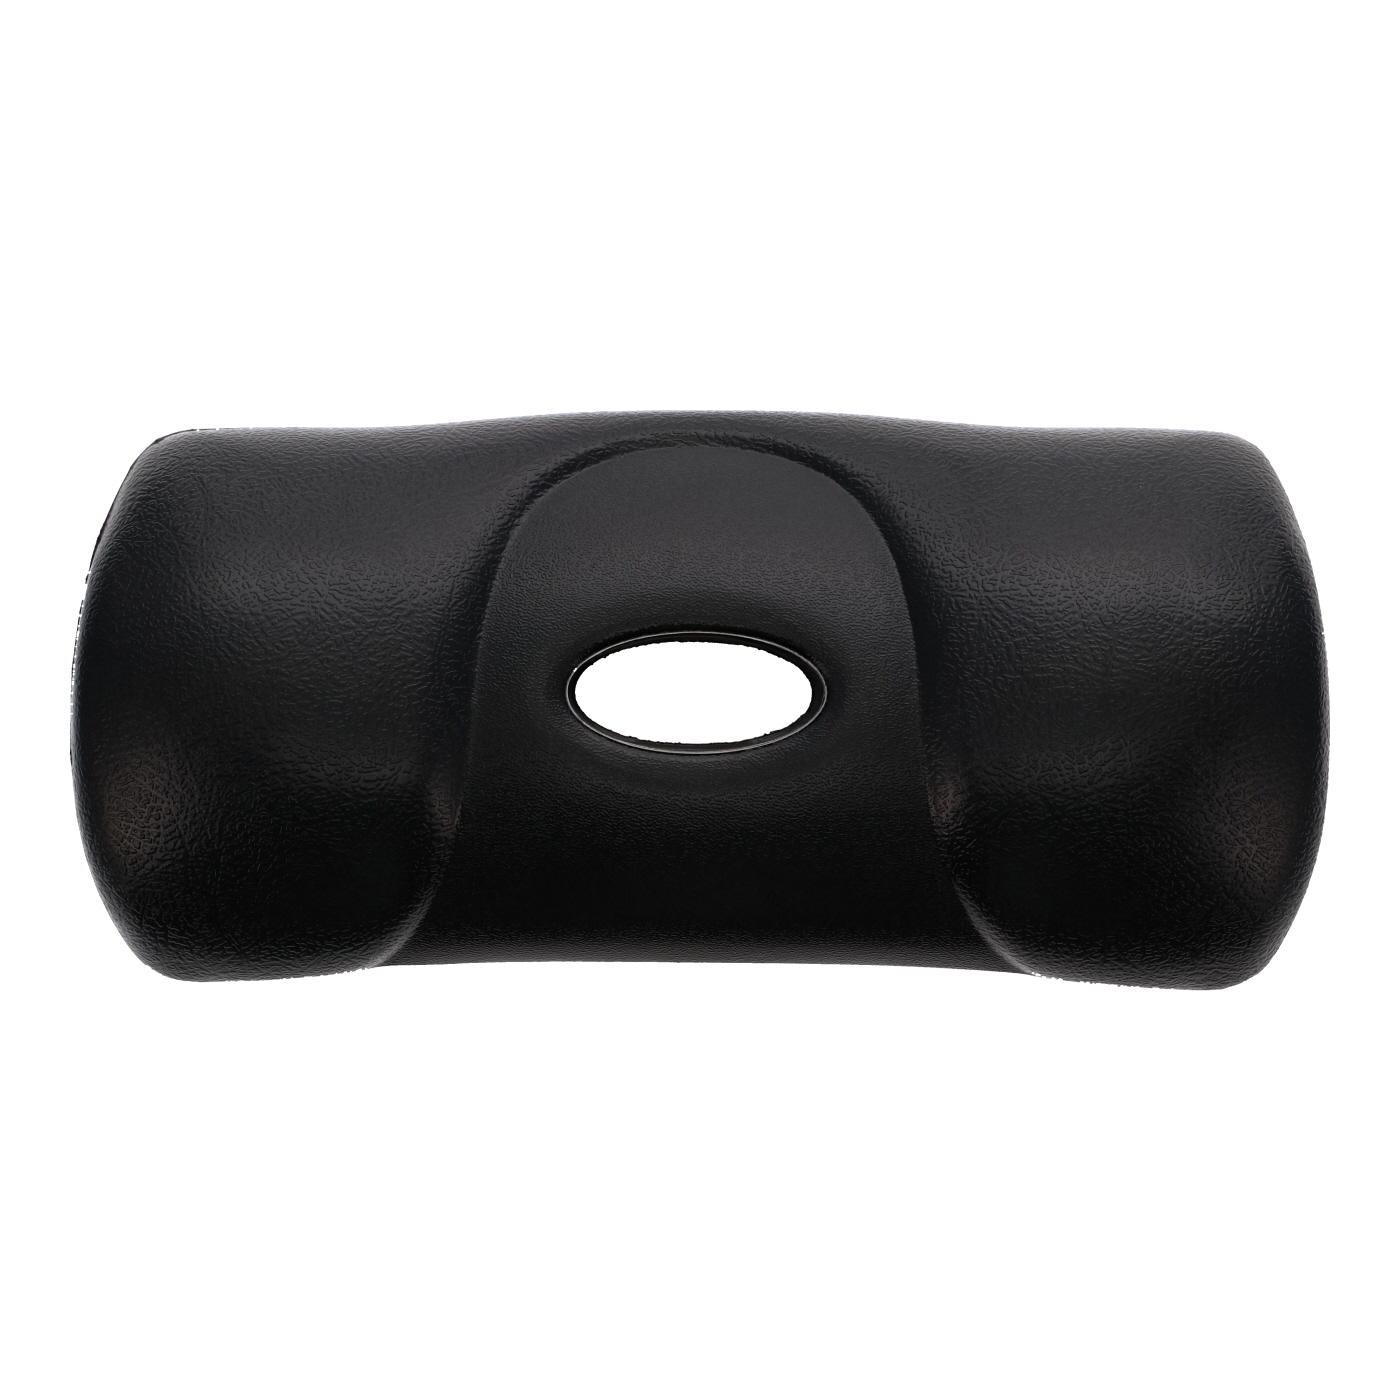 KB251 Replacement Spa Headrest